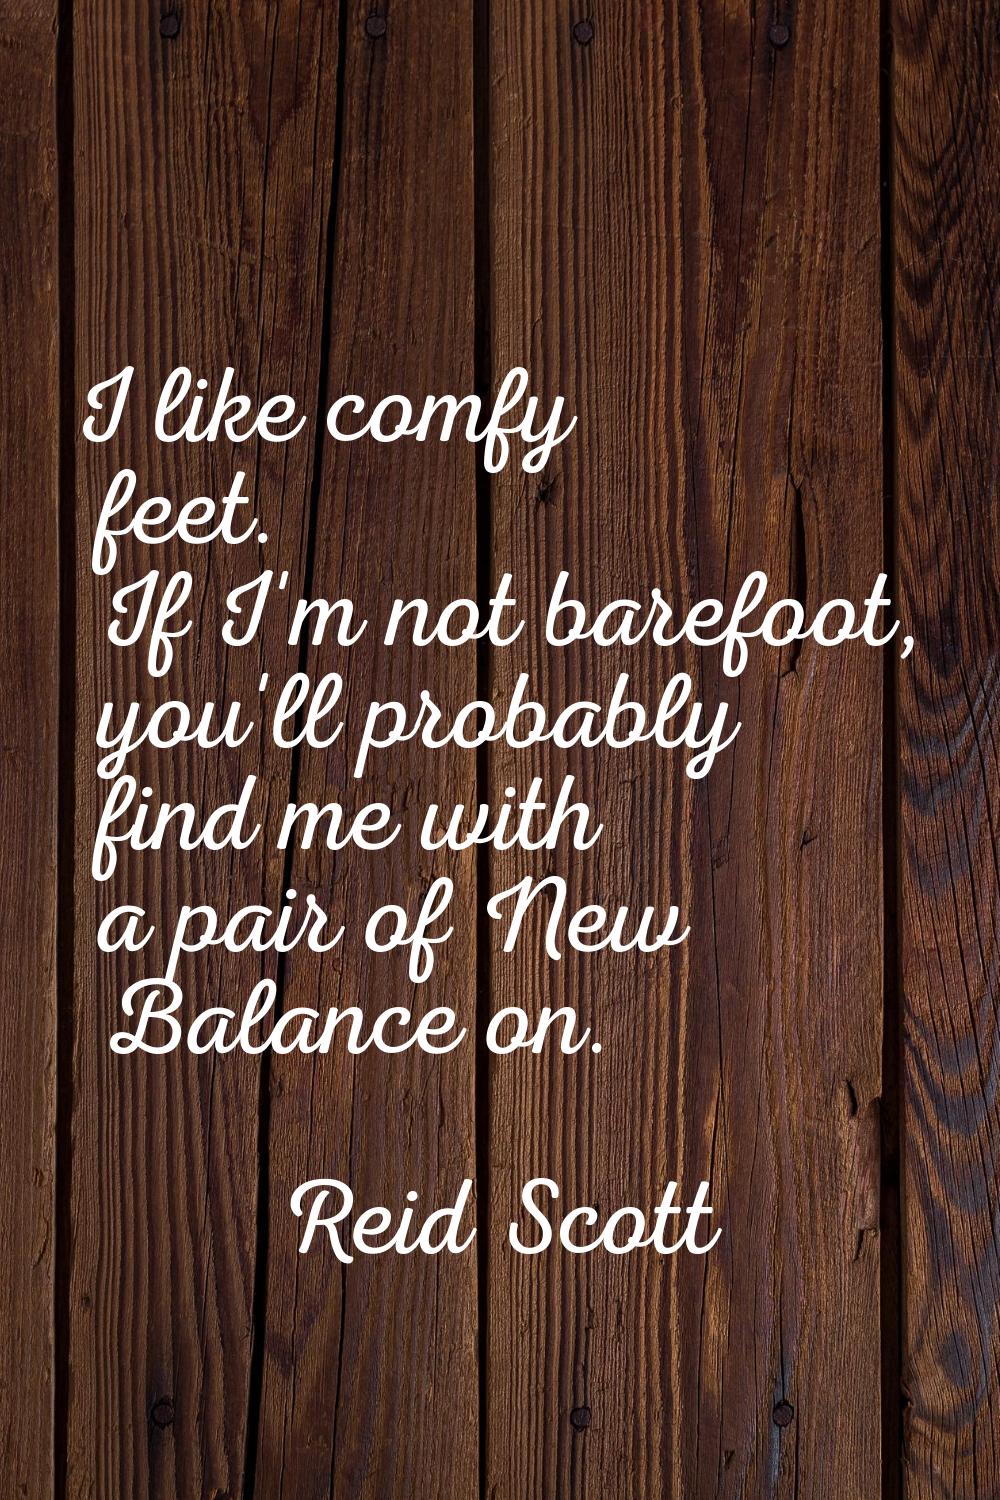 I like comfy feet. If I'm not barefoot, you'll probably find me with a pair of New Balance on.